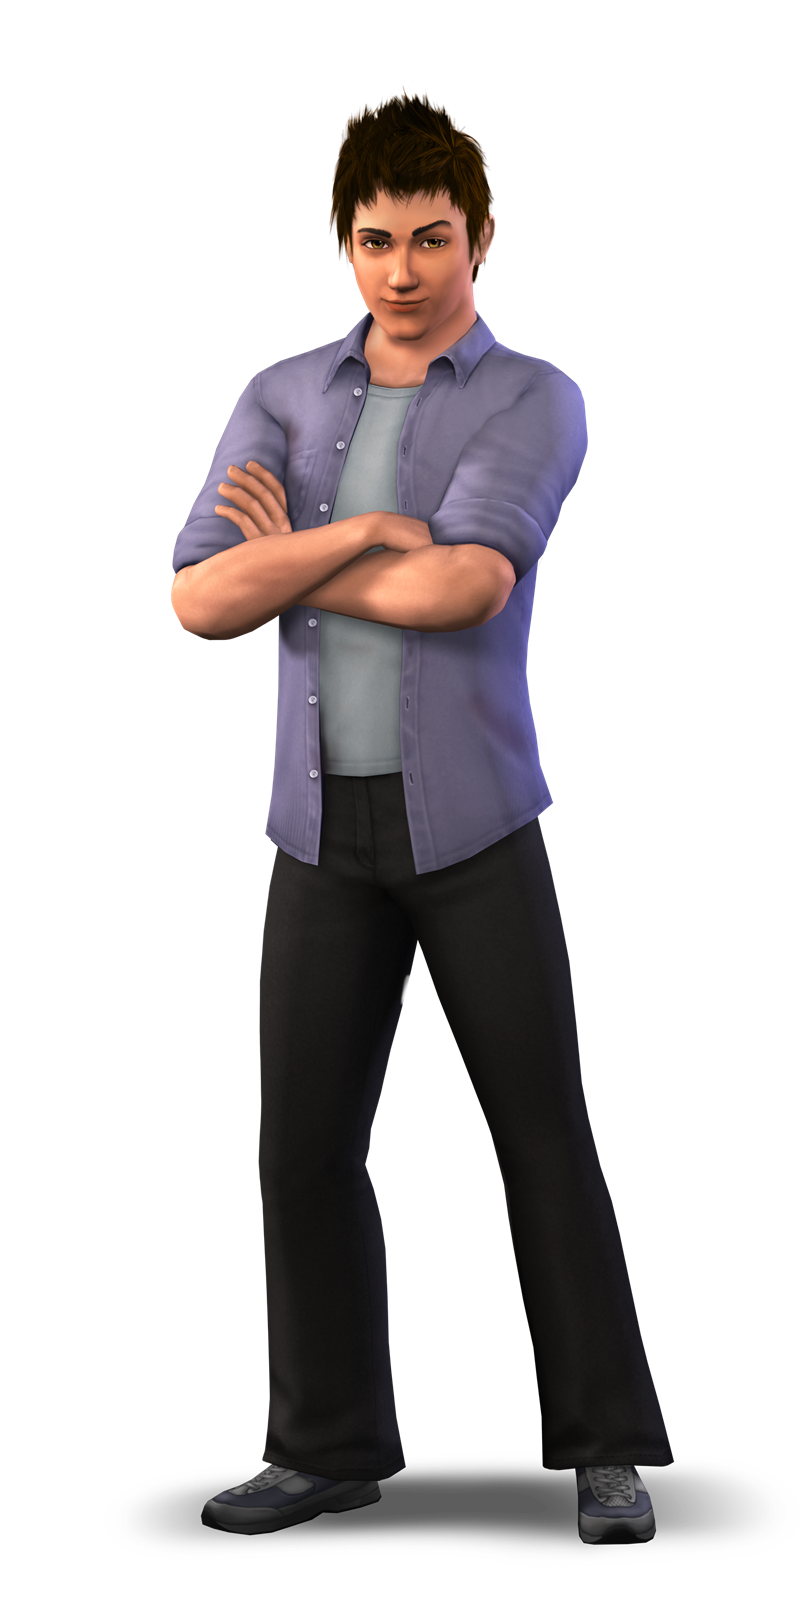 Sims Standing Life University Late Night Shoulder PNG Image